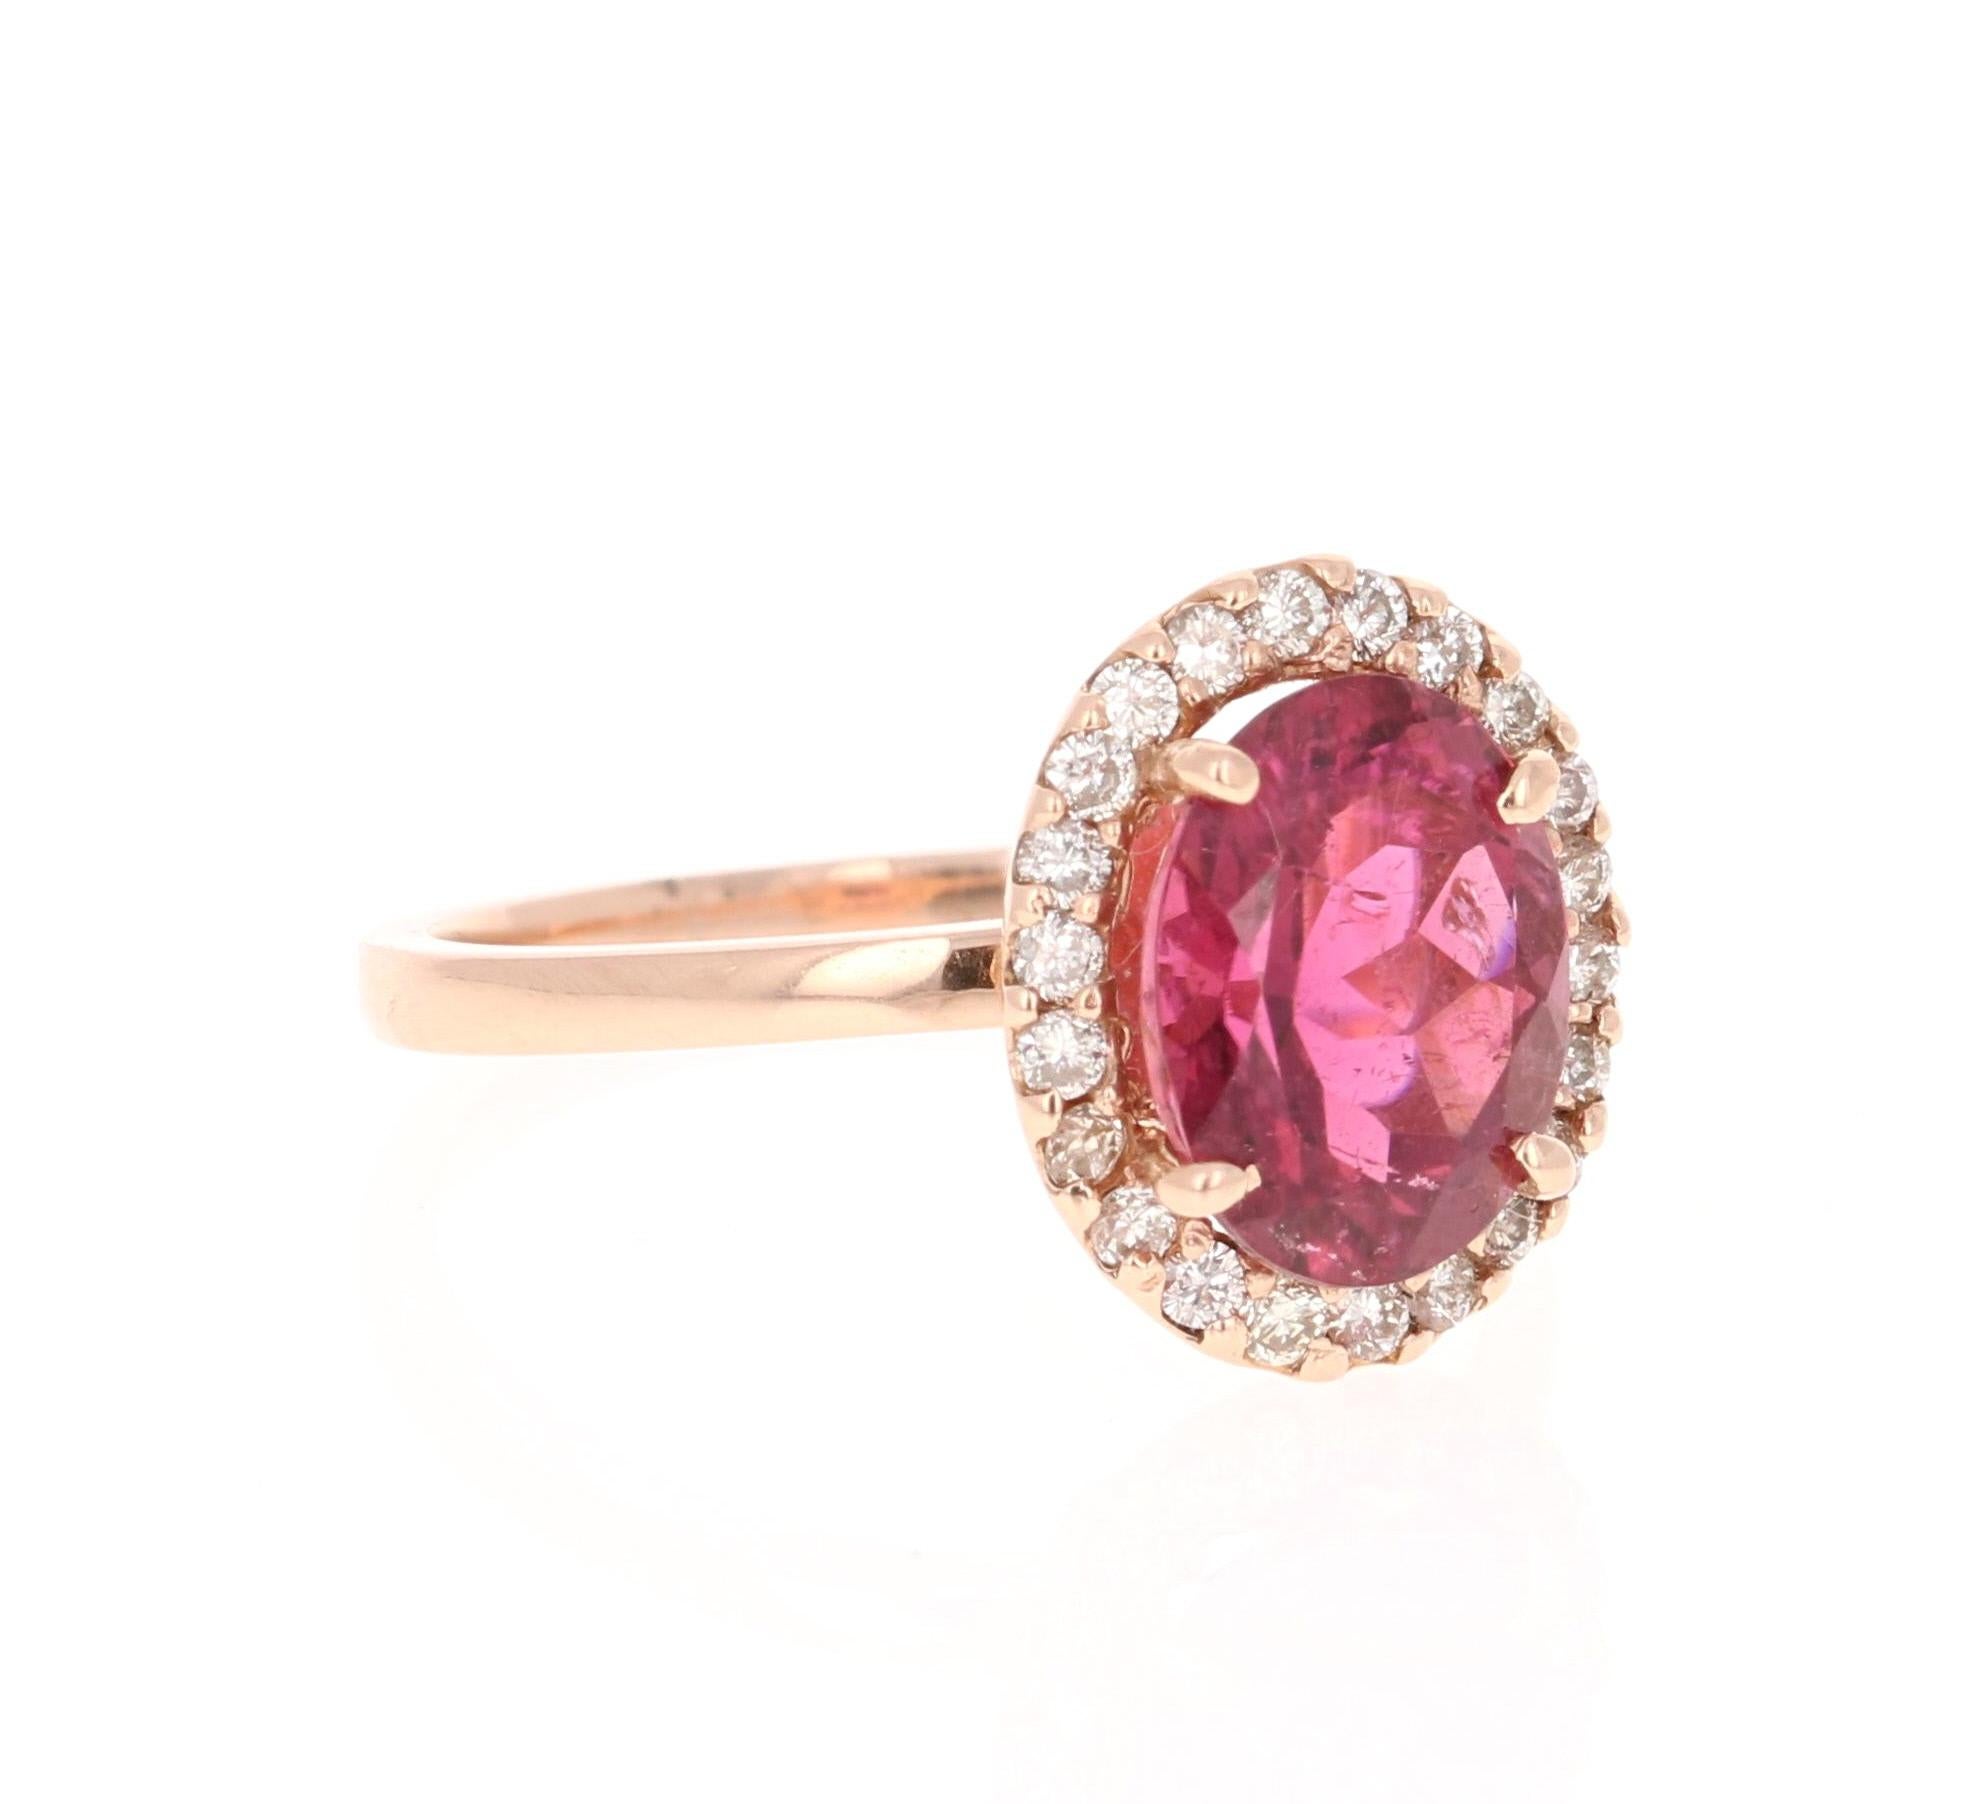 Hot Pink Tourmaline Diamond Ring

This ring has an Oval Cut Hot Pink Tourmaline that weighs 2.77 Carats. Floating around the tourmaline are 22 Round Cut Diamonds weighing 0.34 Carats. The total carat weight of the ring is 3.11 Carats. 

The